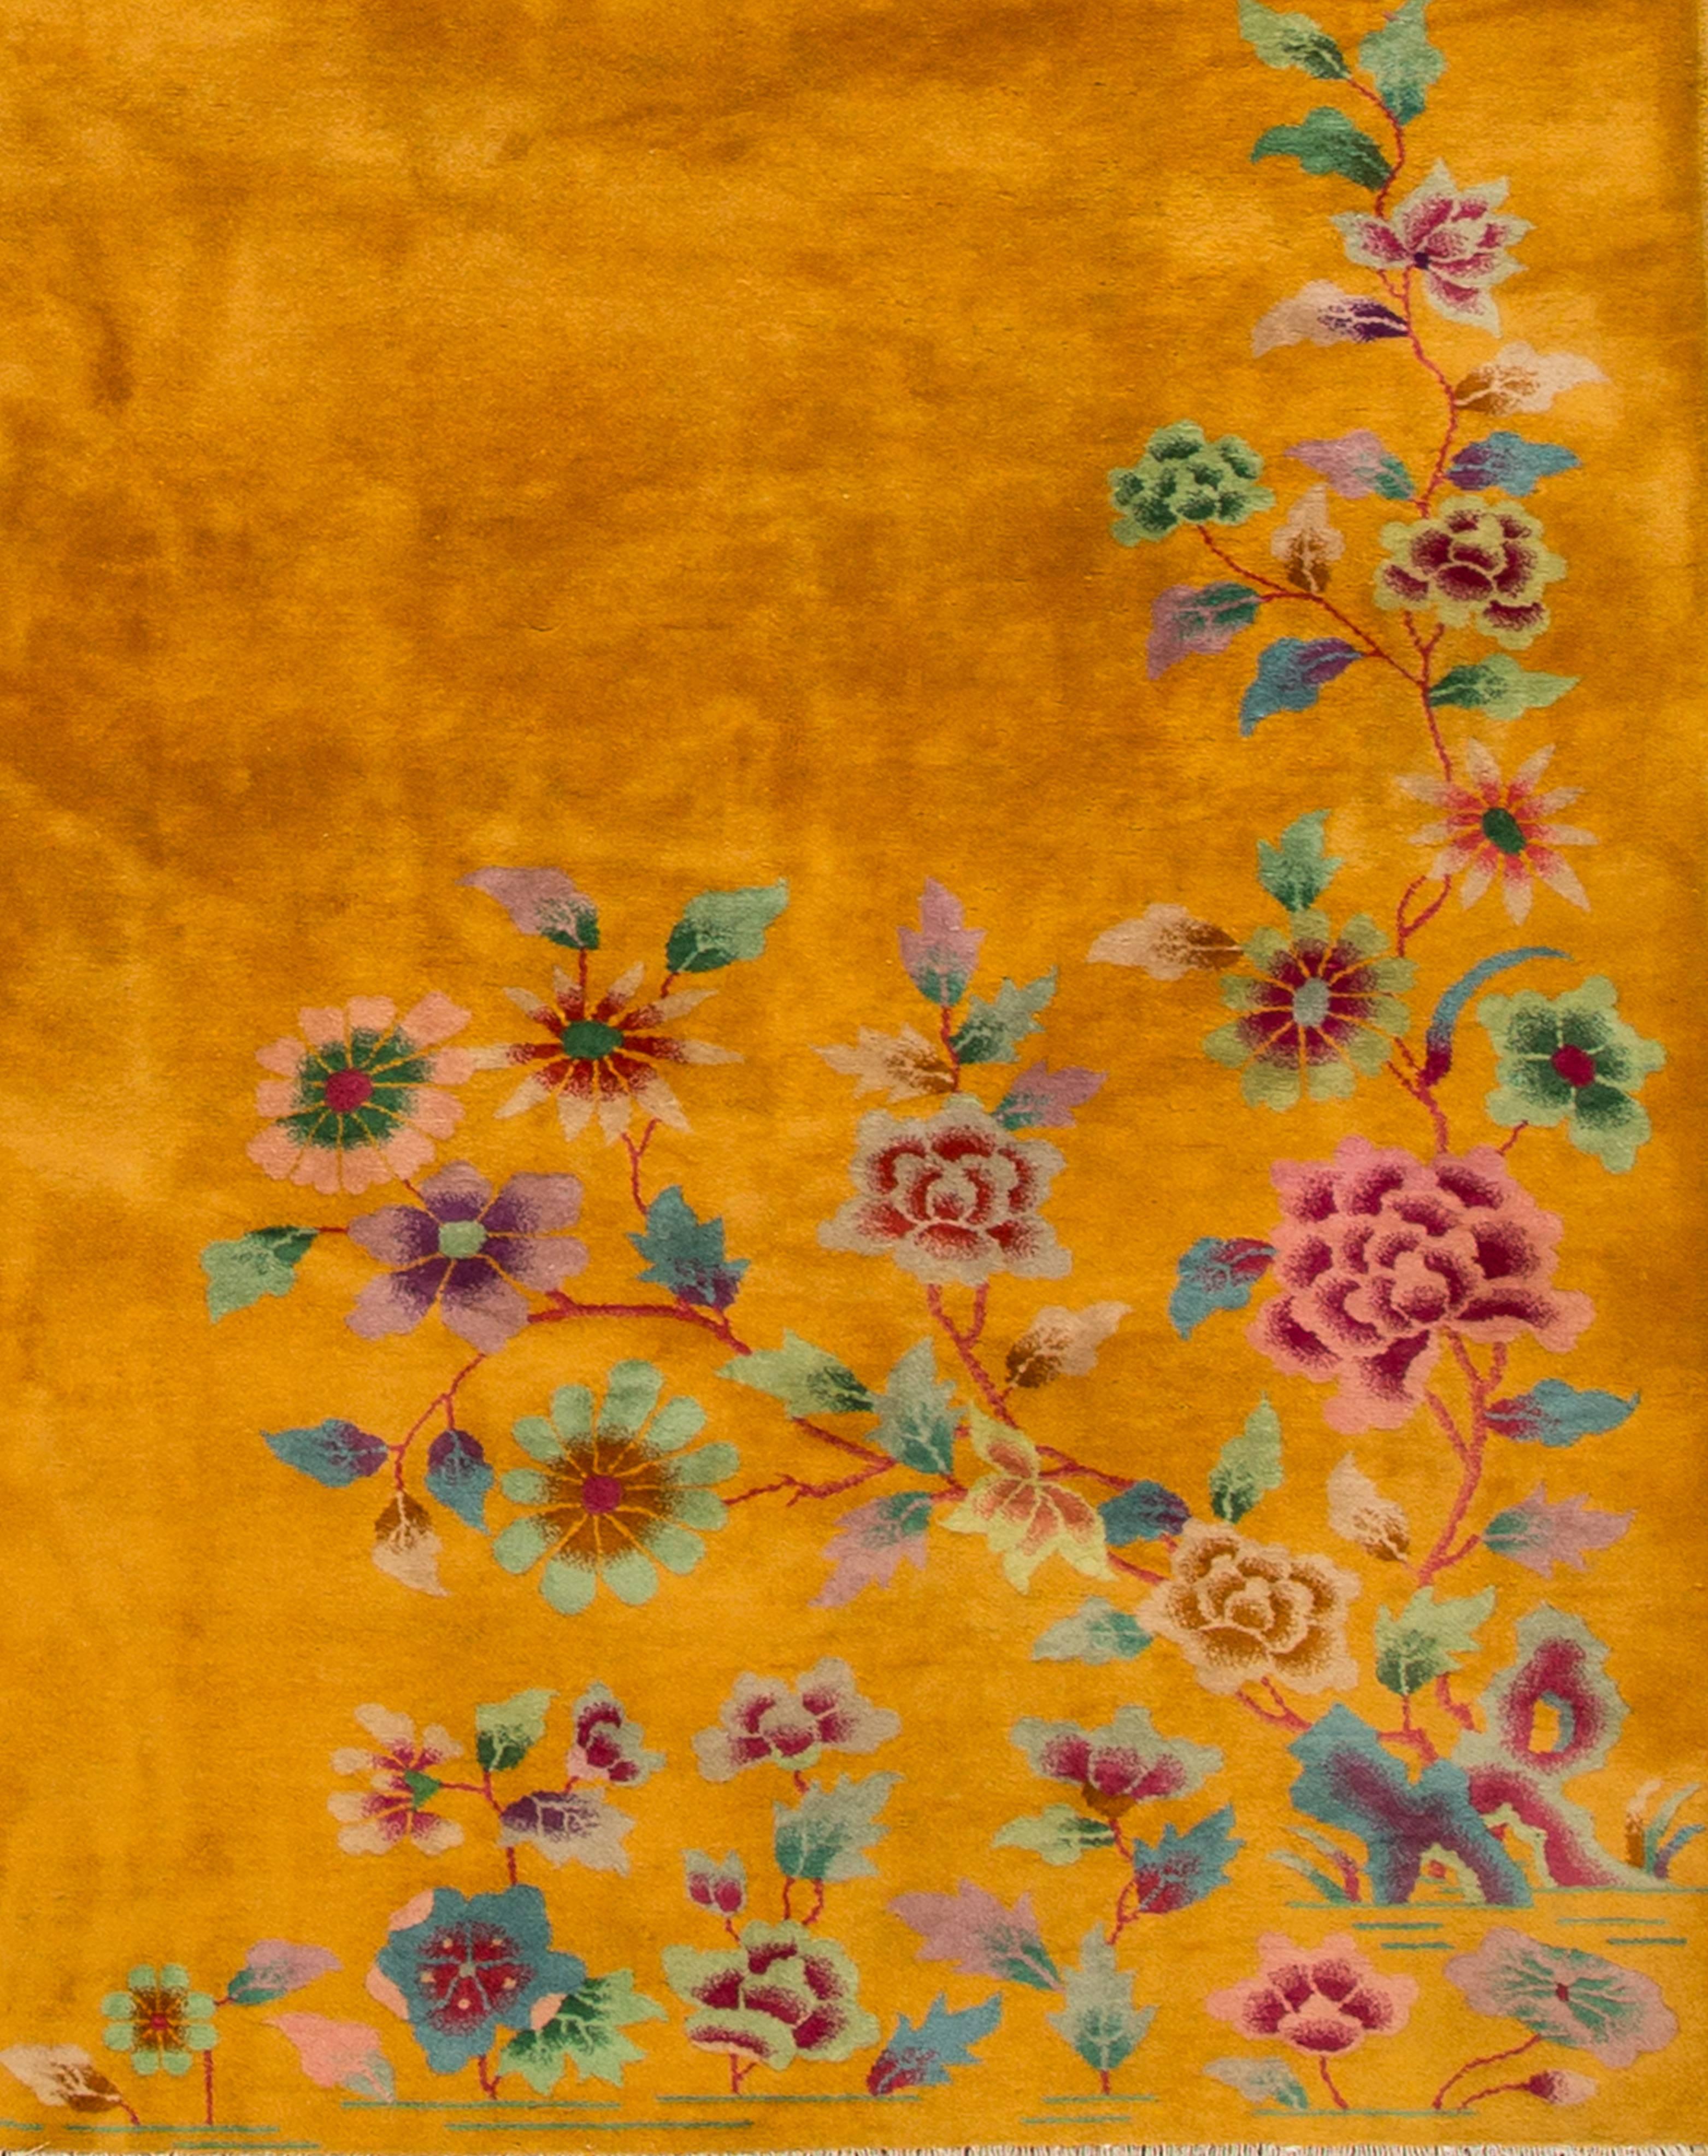 Early 20th century Chinese Nichols carpet, yellow/gold field with colorful floral details (corners), measure: 9 x 11.07.